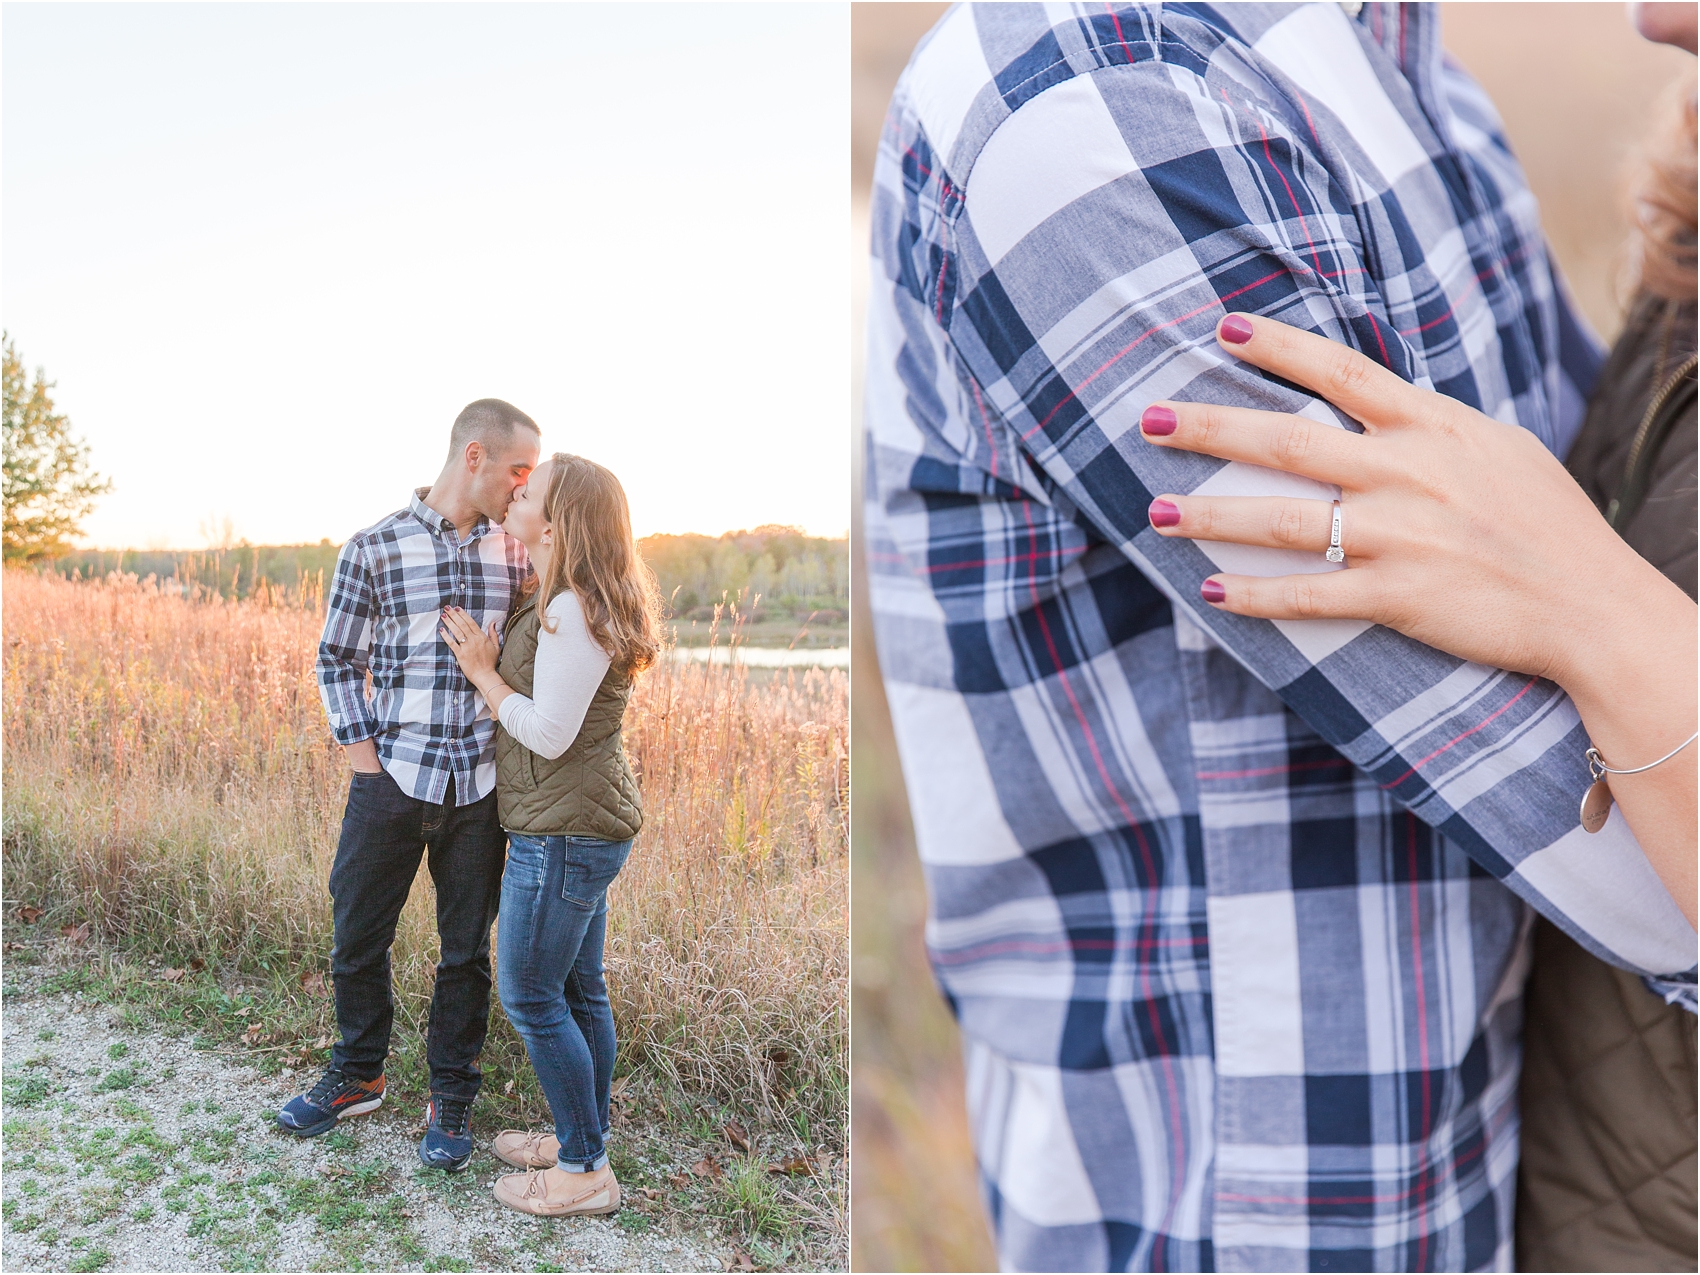 romantic-fall-engagement-photos-at-indian-springs-metropark-in-clarkston-mi-by-courtney-carolyn-photography_0004.jpg